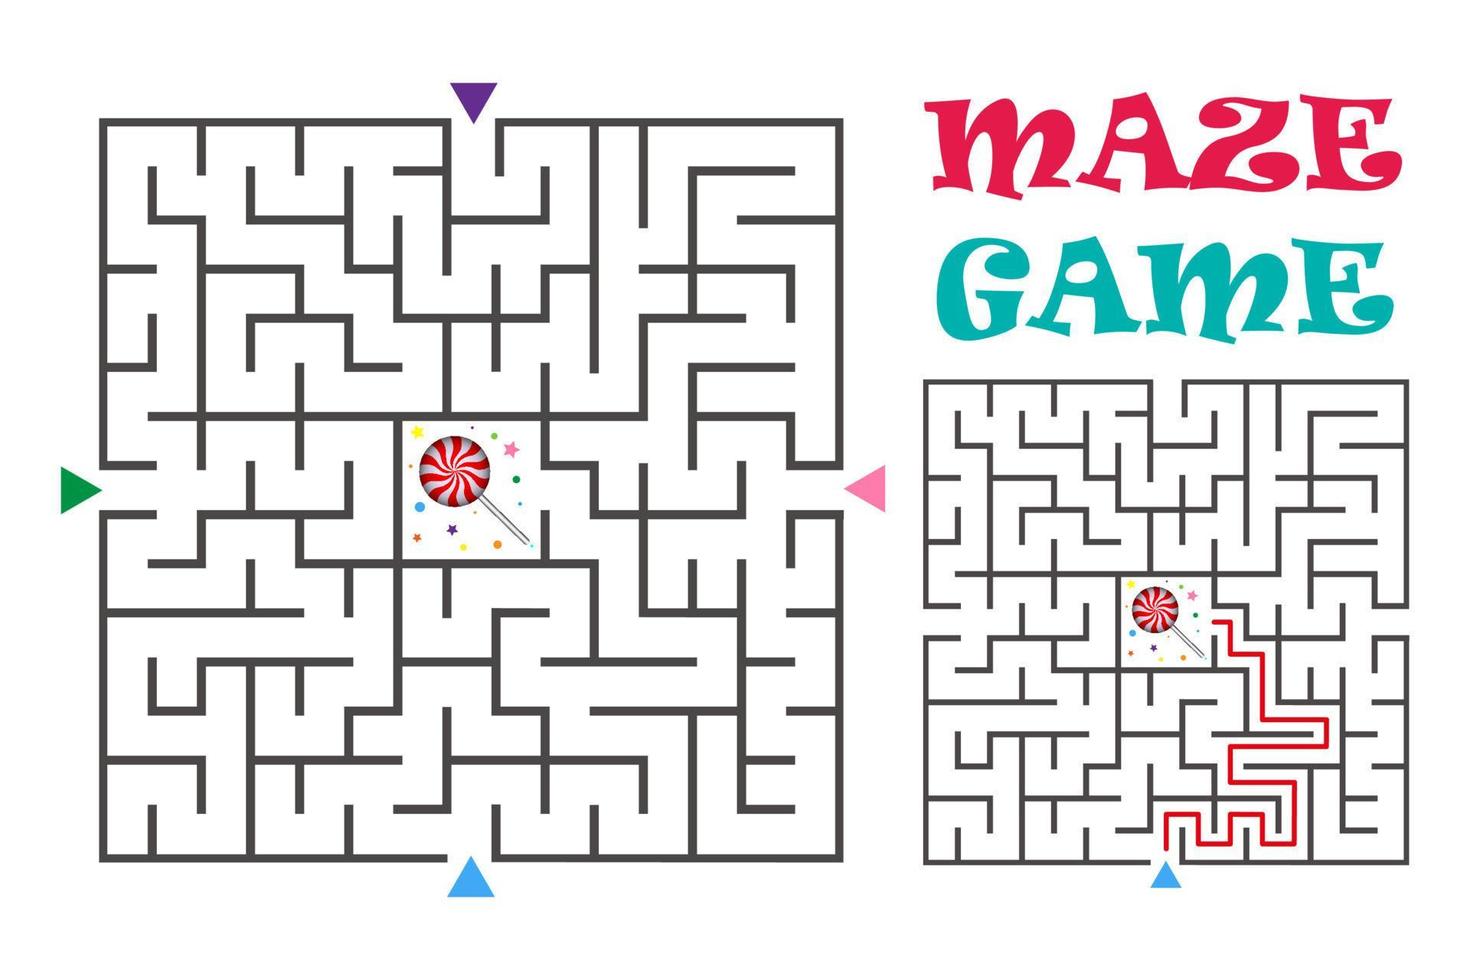 Square maze labyrinth game for kids. Logic conundrum with candy. Three entrance and one right way to go. Vector flat illustration isolated on white background.